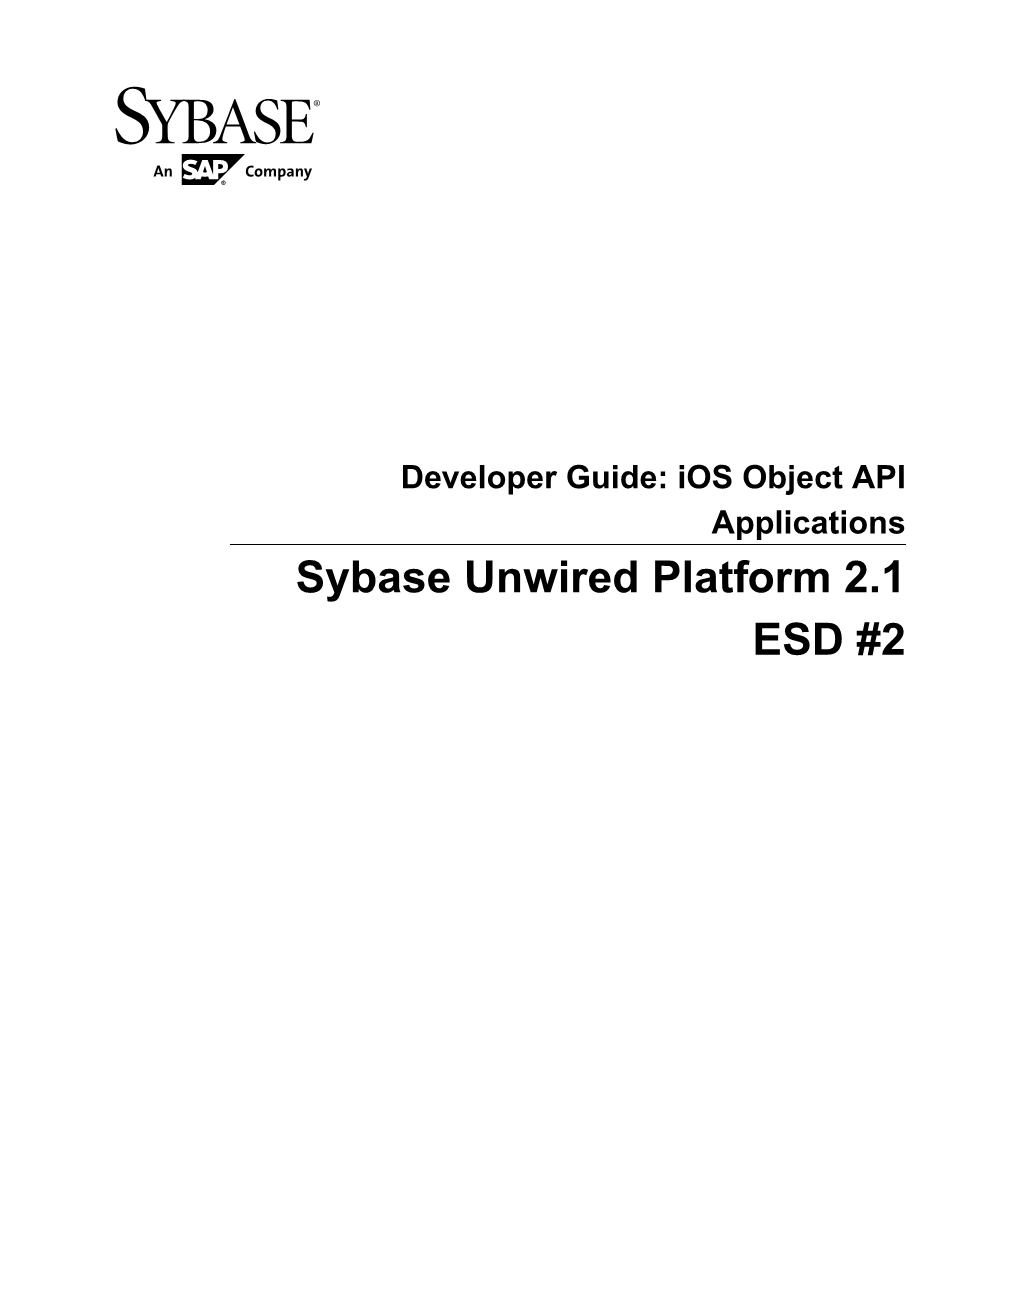 Ios Object API Applications Sybase Unwired Platform 2.1 ESD #2 DOCUMENT ID: DC01217-01-0212-02 LAST REVISED: July 2012 Copyright © 2012 by Sybase, Inc